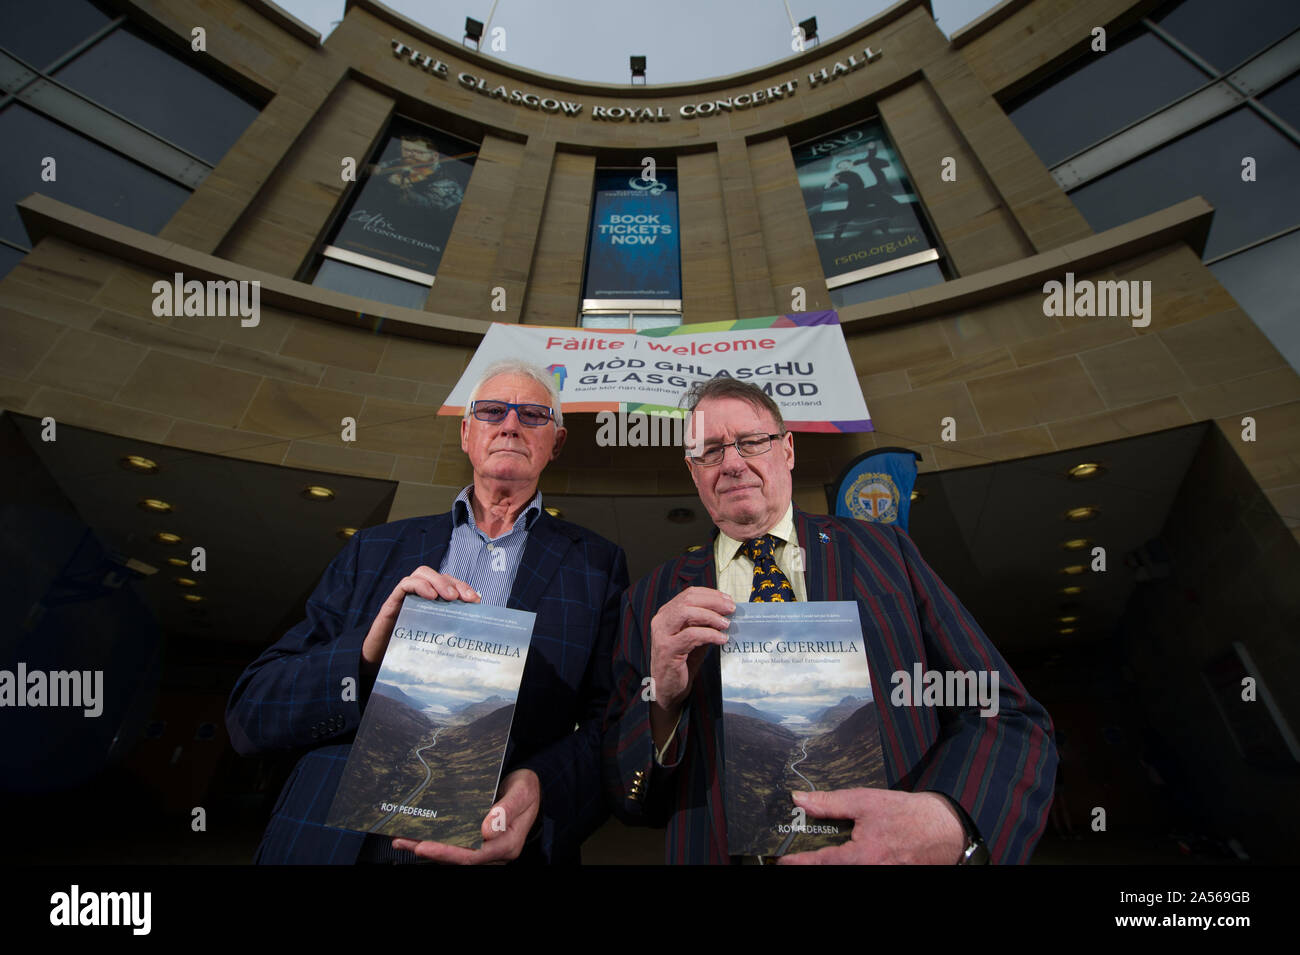 Glasgow, 17 October 2019. Pictured: (left) John Angus Mackay, and, (right) Roy Pedersen. Language Activist John Angus Mackay became well known as the ‘Gaelic Guerrilla’ because of his outstanding ability to campaign effectively through advocacy, influence, pressure and persuasion. As his biographer Roy Pedersen says, Mackay deployed ‘phycology, subterfuge, persuasion, passion, tenacity and, above all, courage’ in his lifelong battle to save and strengthen the Gaelic tongue and culture. Credit: Colin D Fisher/CDFIMAGES.COM Stock Photo